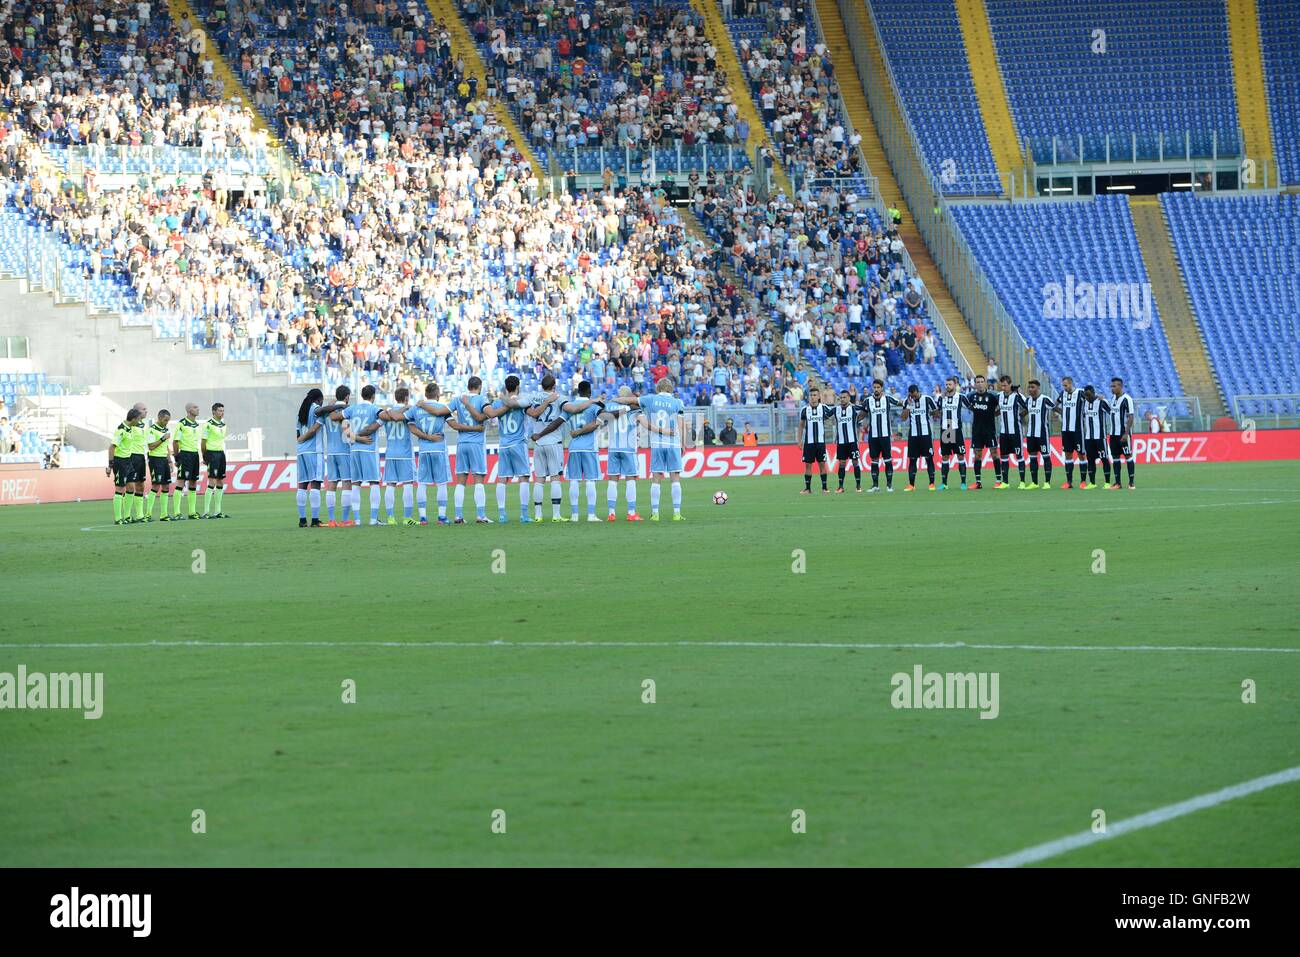 F.C. Juventus and S.S. Lazio deployed in midfield in memory of the victims of the earthquake in Italy Centre during the Italian Serie A football match between S.S. Lazio and F.C. Juventus at the Olympic Stadium in Rome, on august 27, 2016. Stock Photo